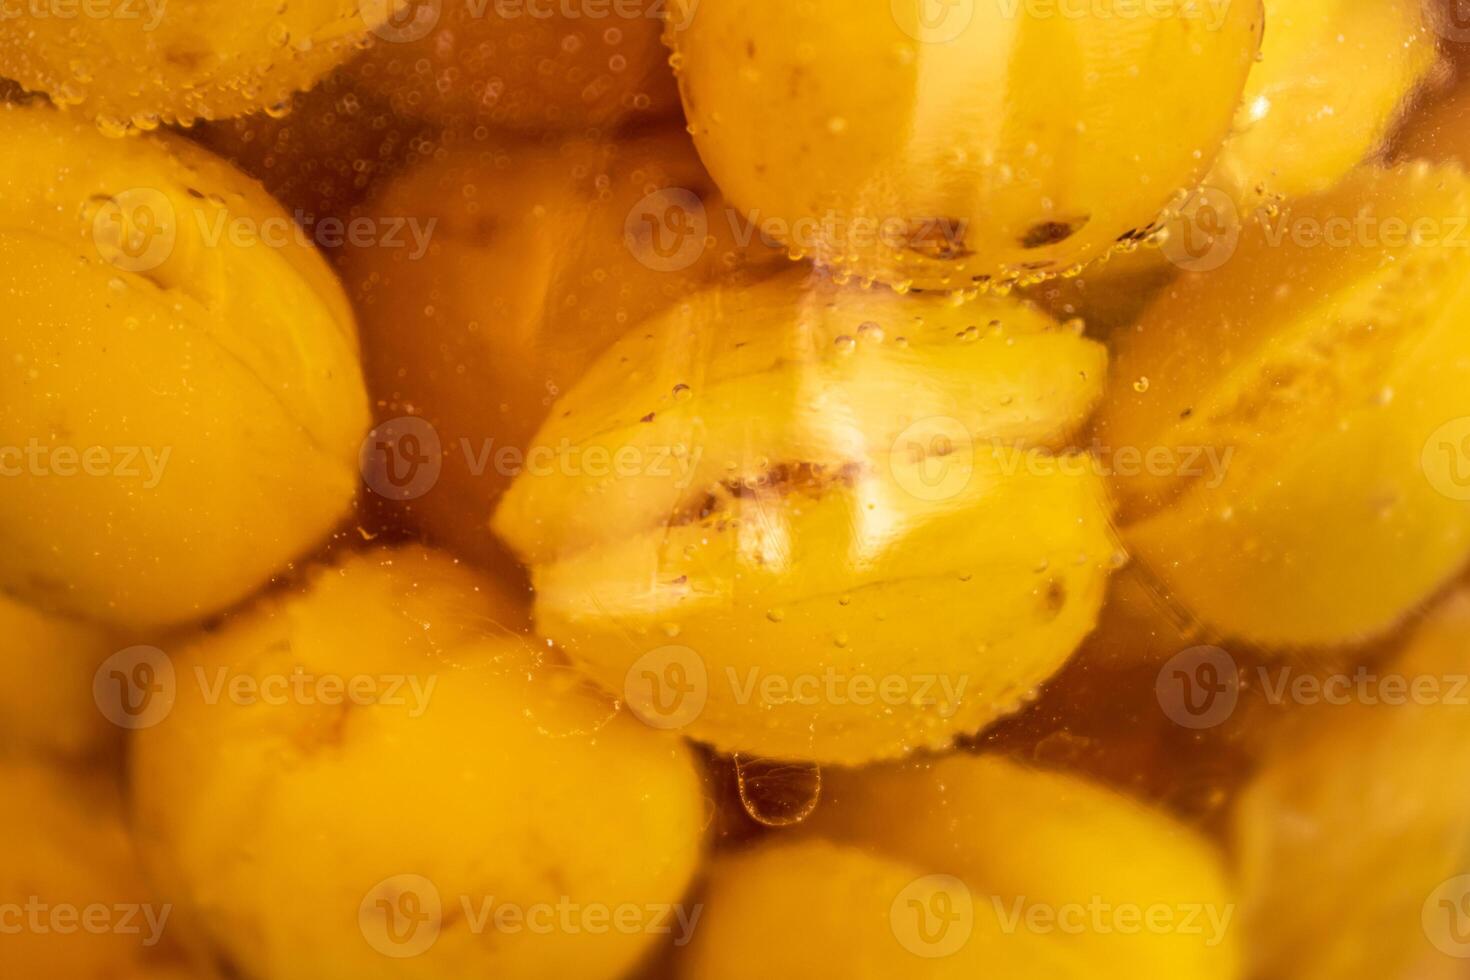 Sterilized mirabelle plums, homemade fruits in syrup for the winter, preserves nutrients photo